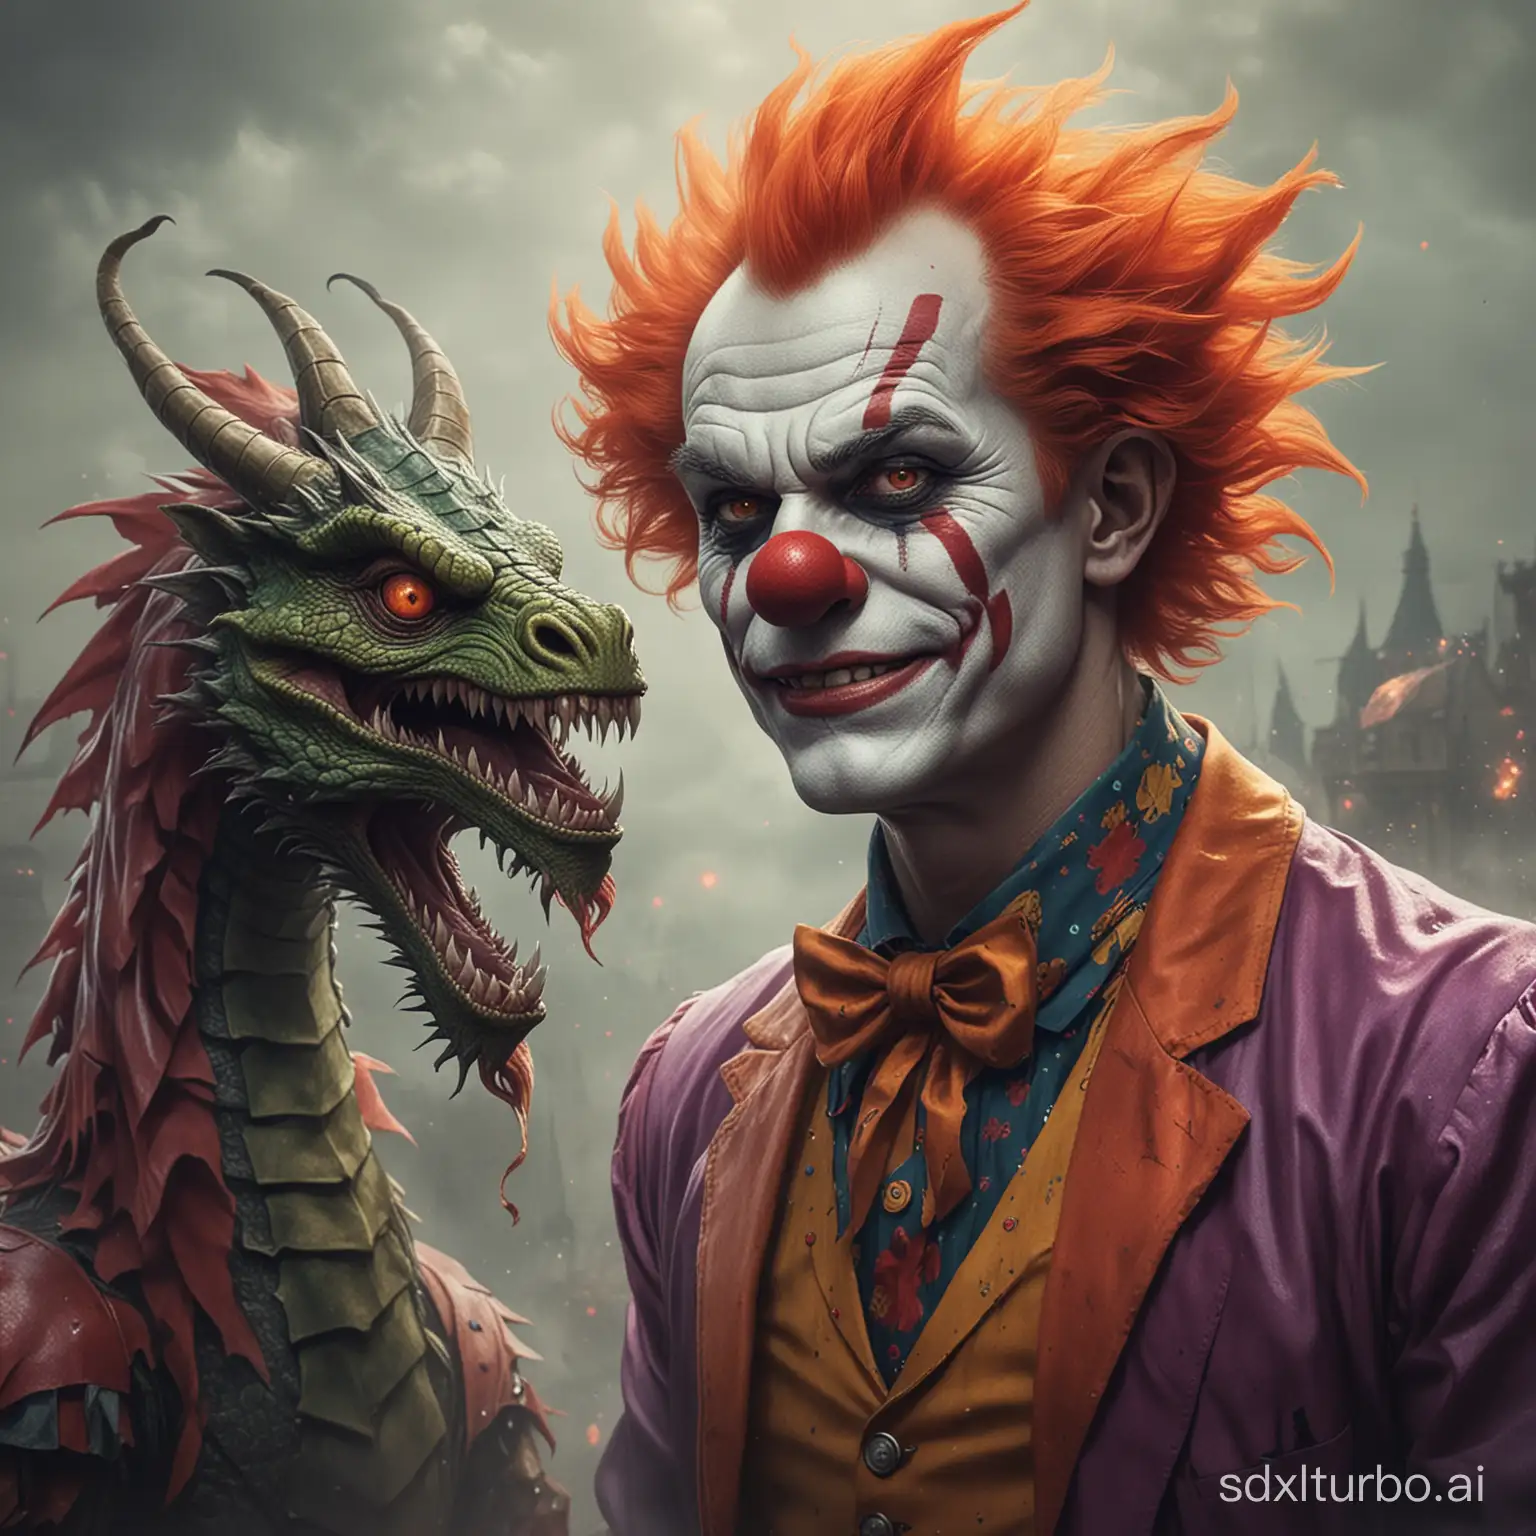 Combine the clown and the dragon